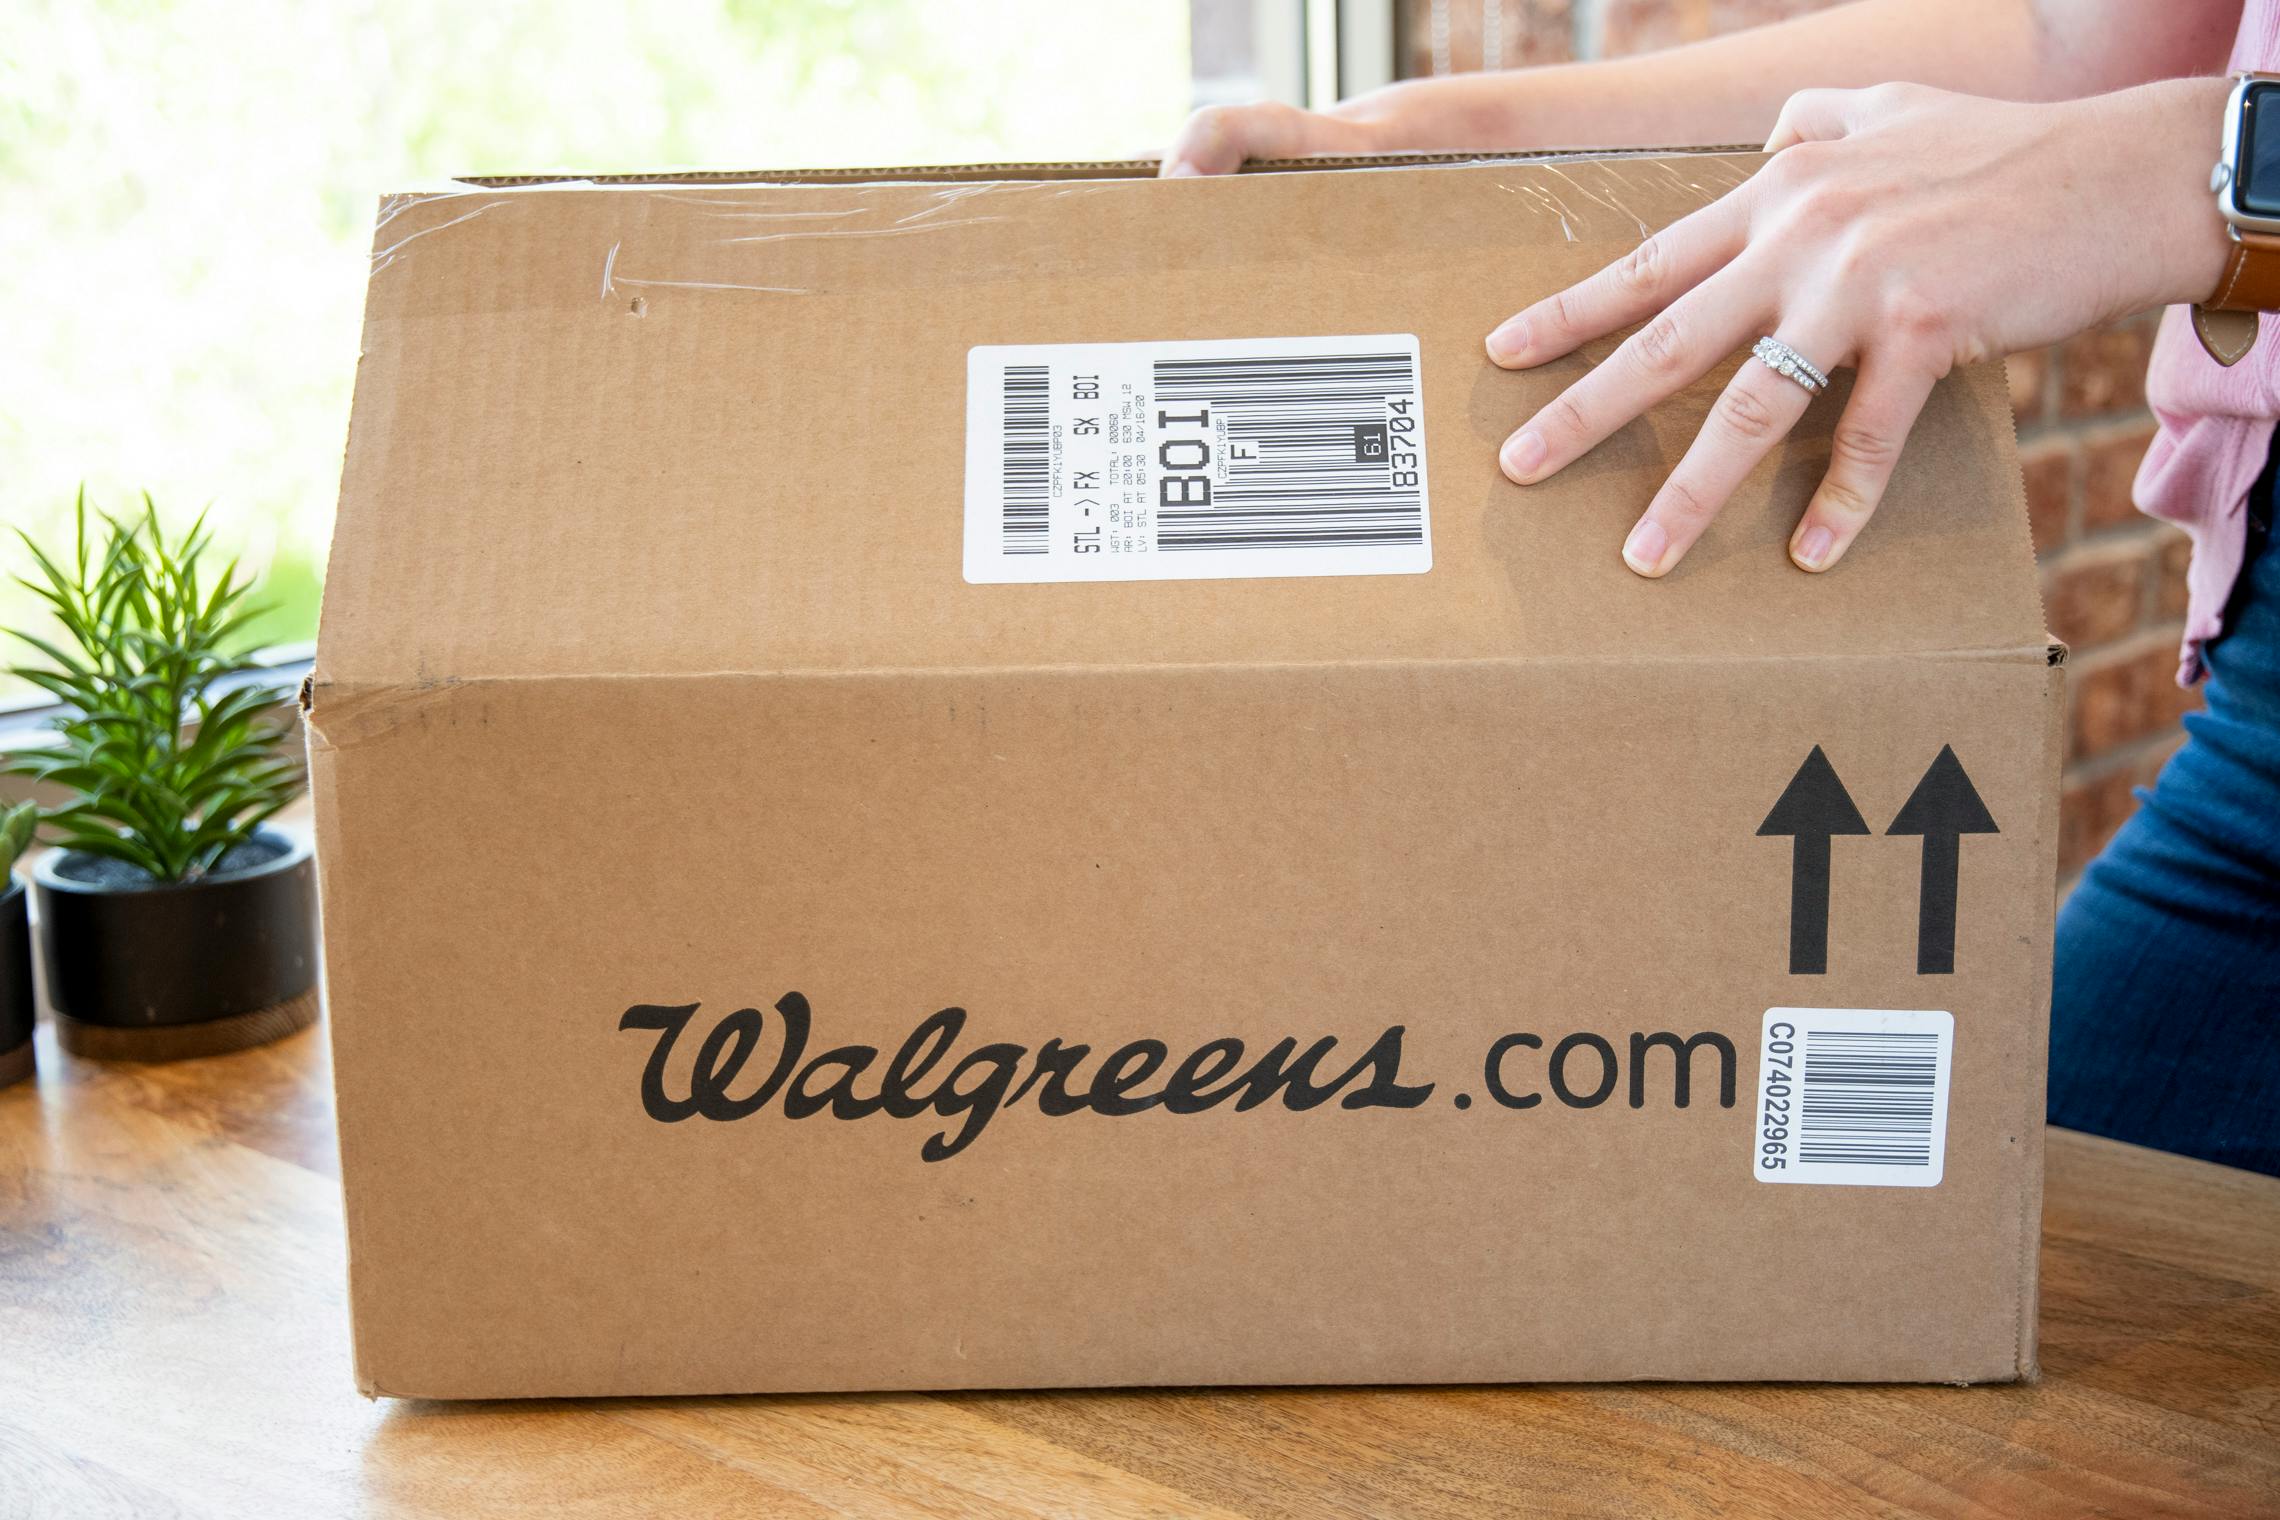 A person opening a Walgreens.com delivery box.